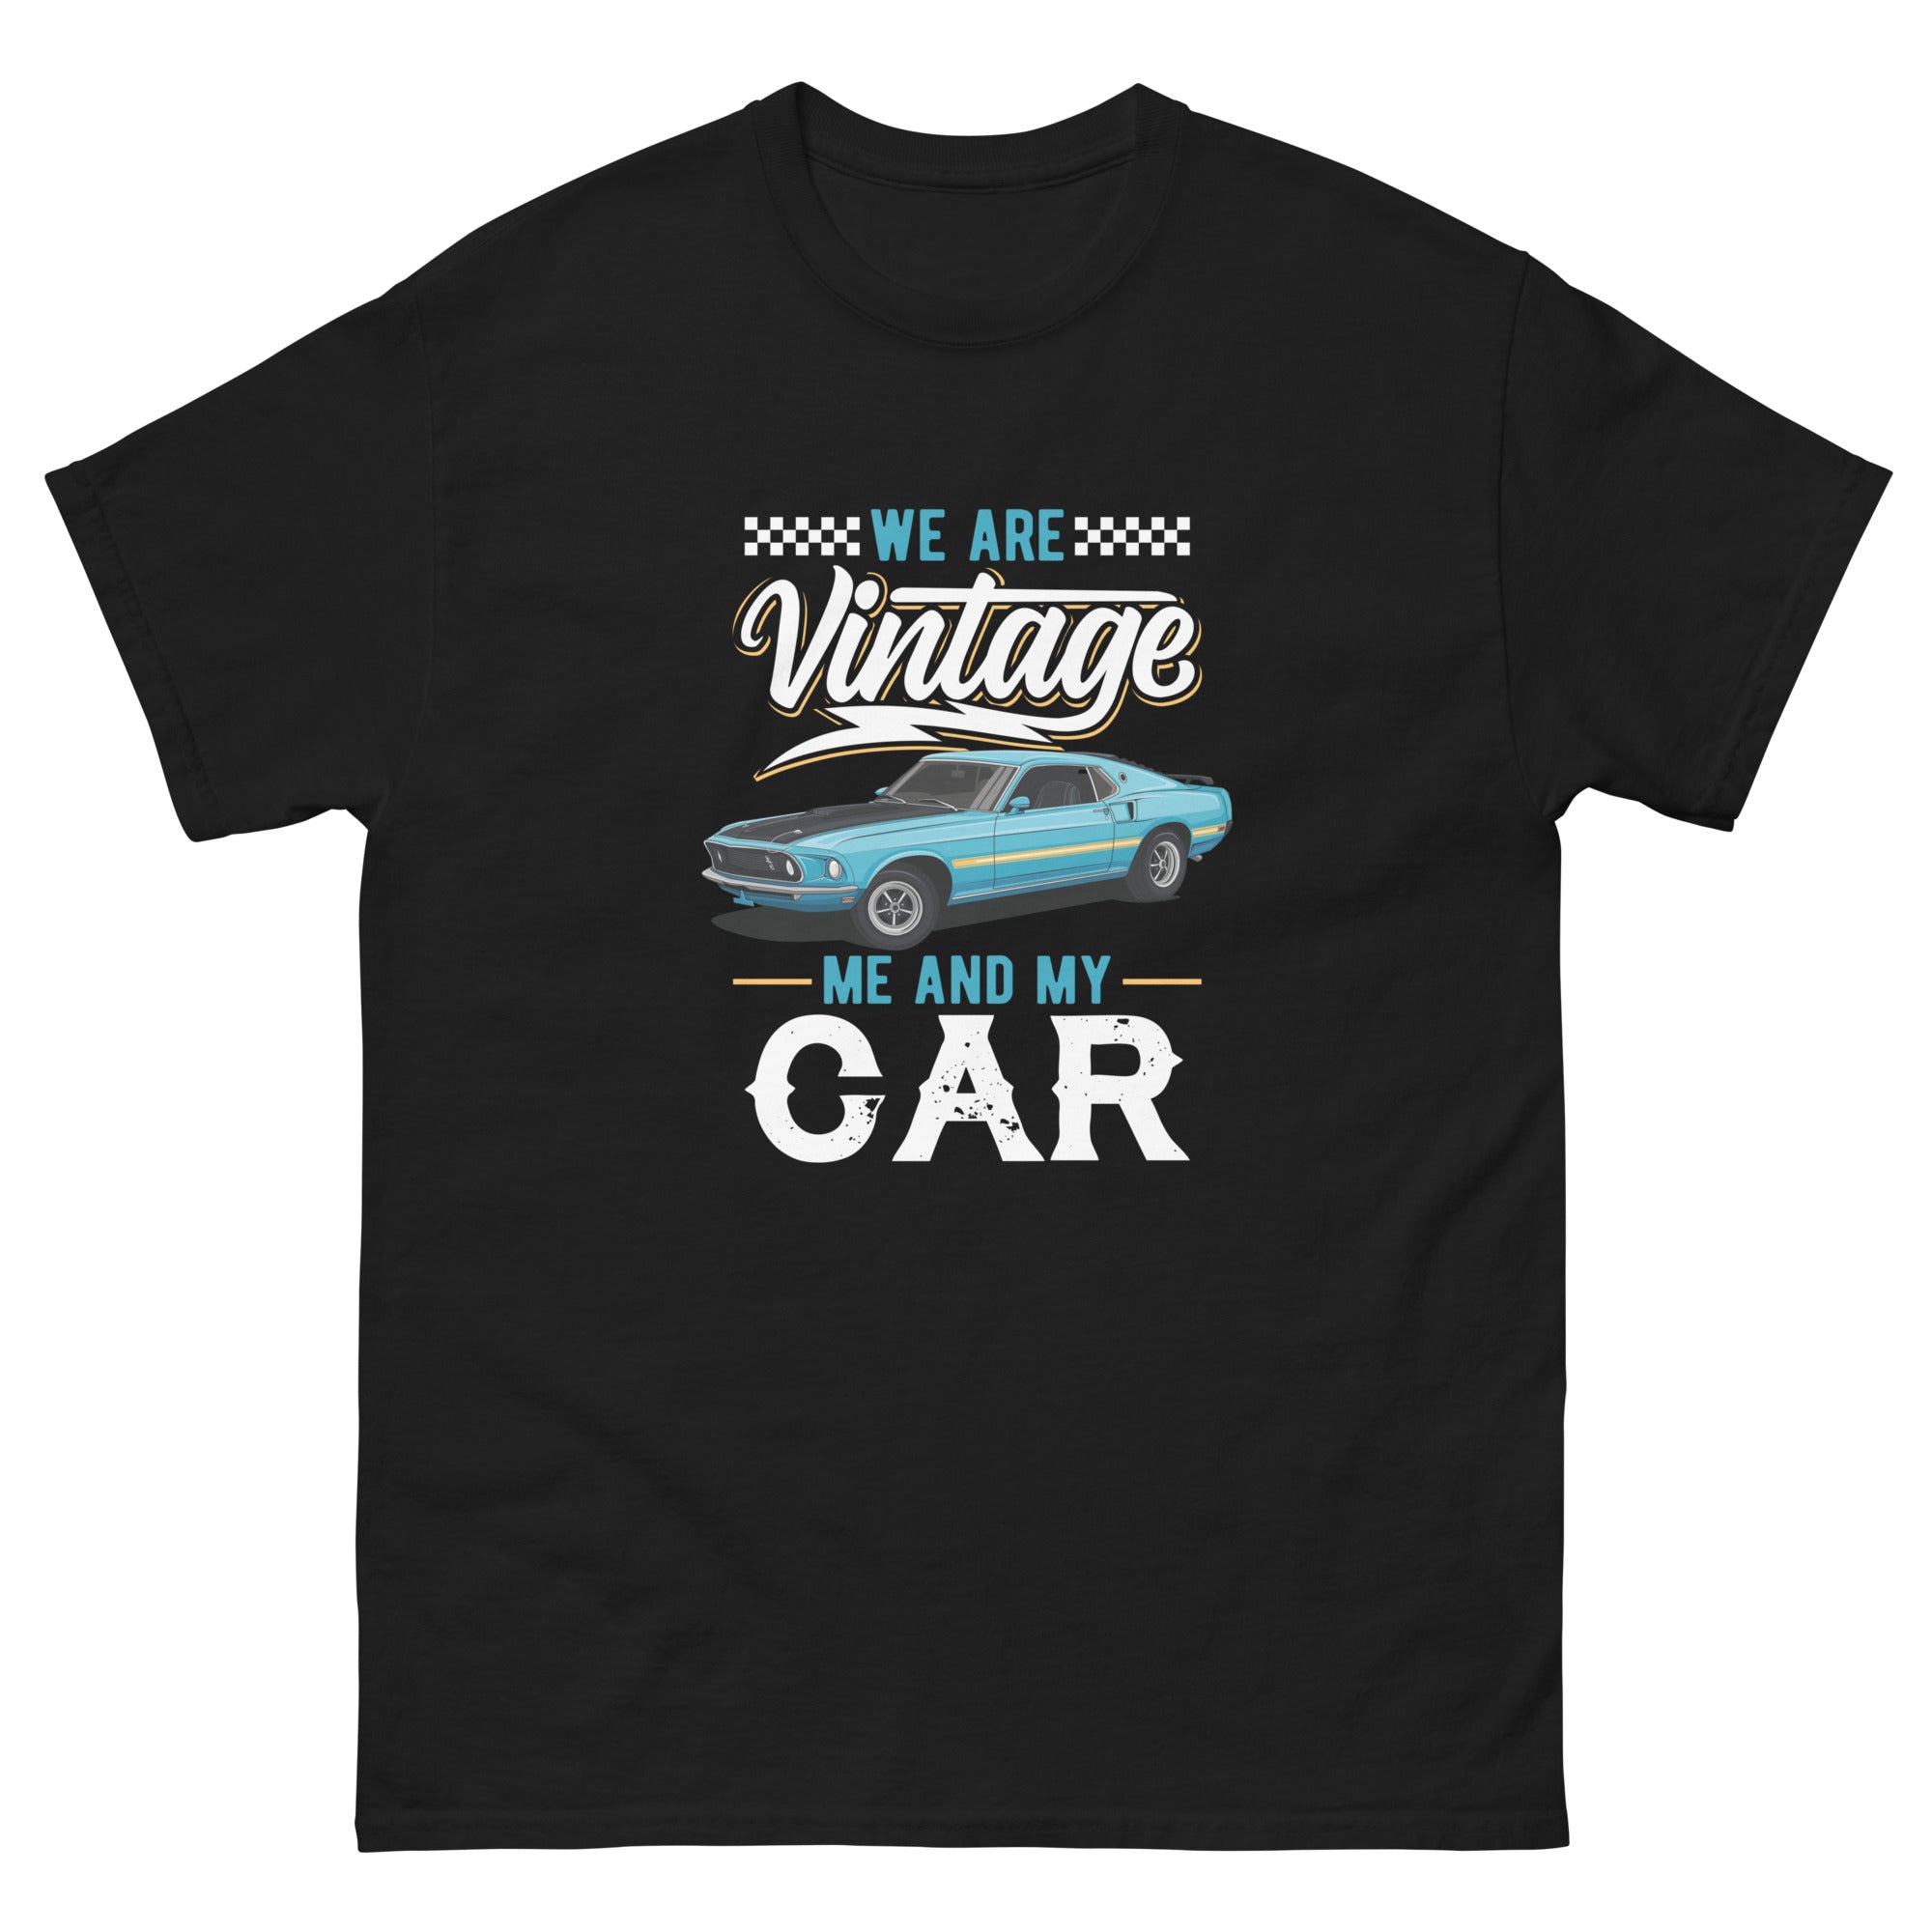 We are Vintage classic tee